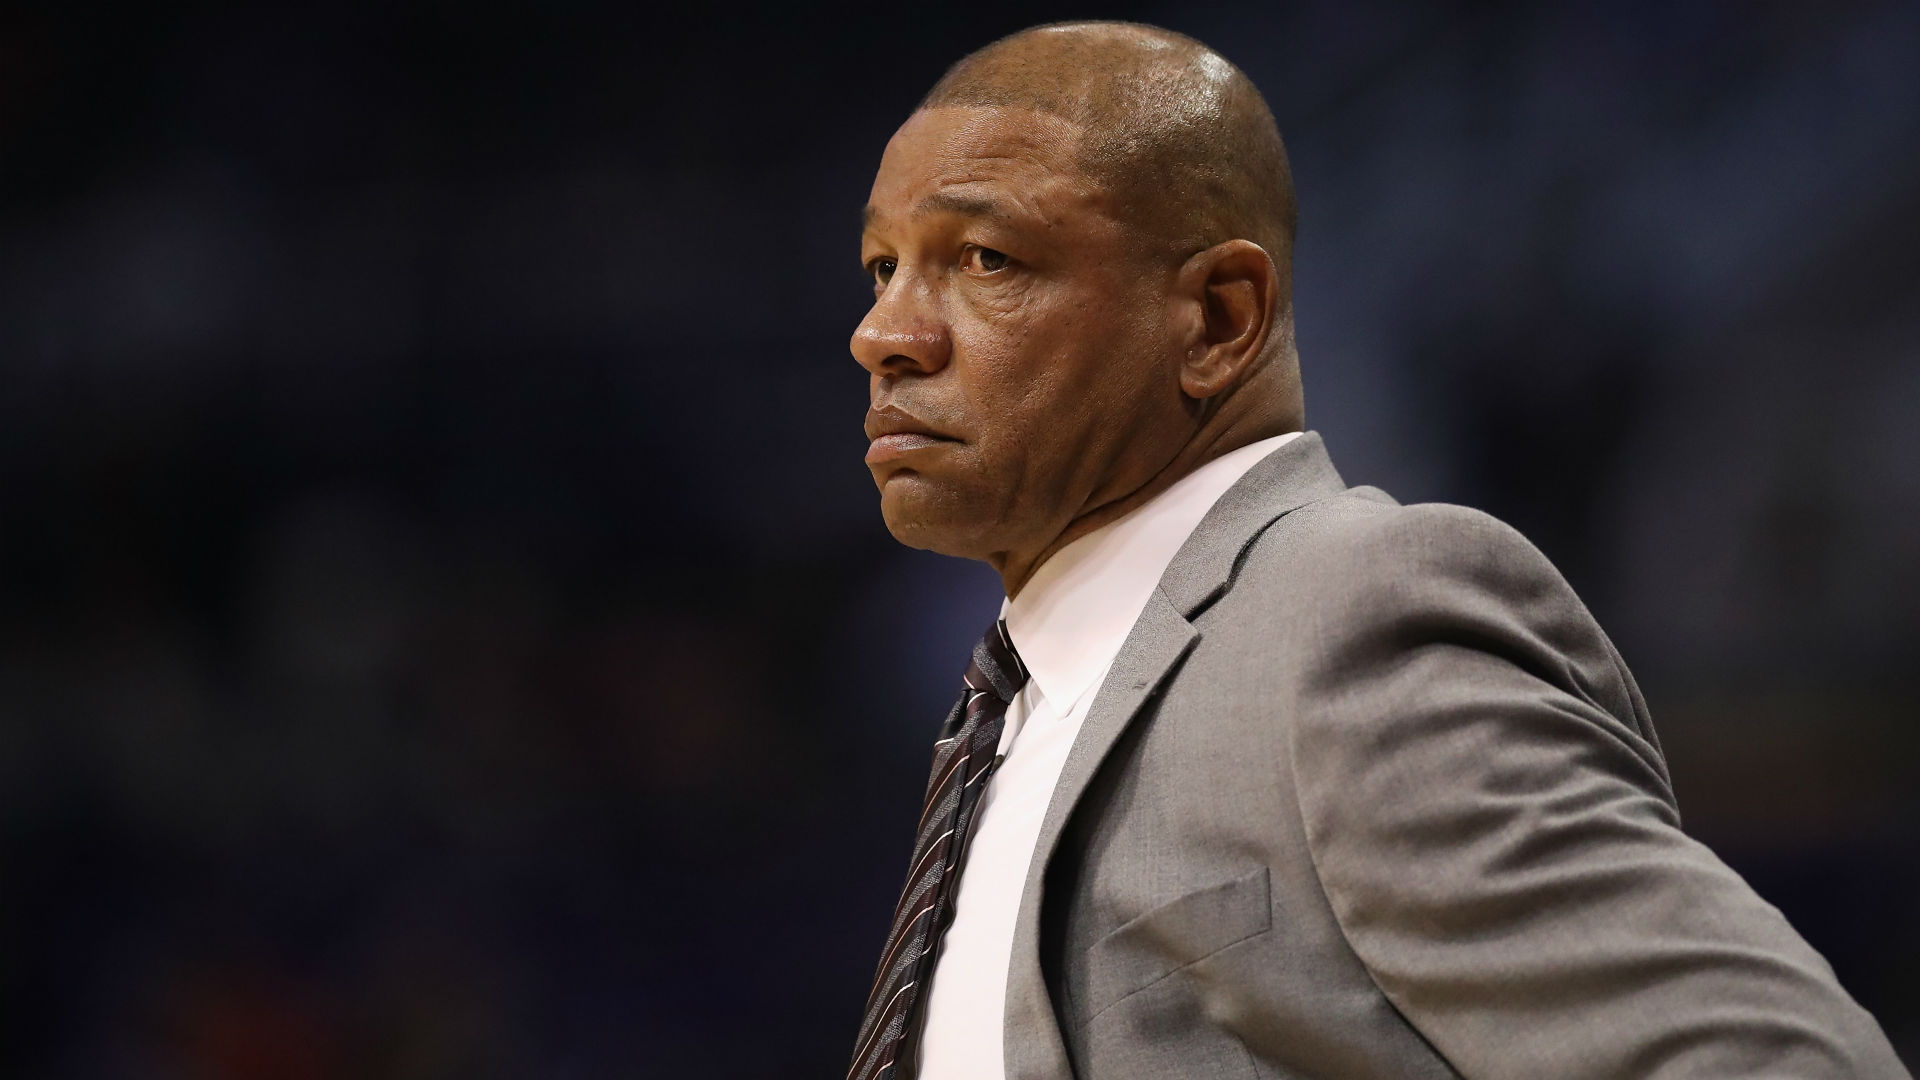 Doc Rivers felt the Clippers made life too easy for the Eastern Conference leaders at Staples Center on Tuesday.